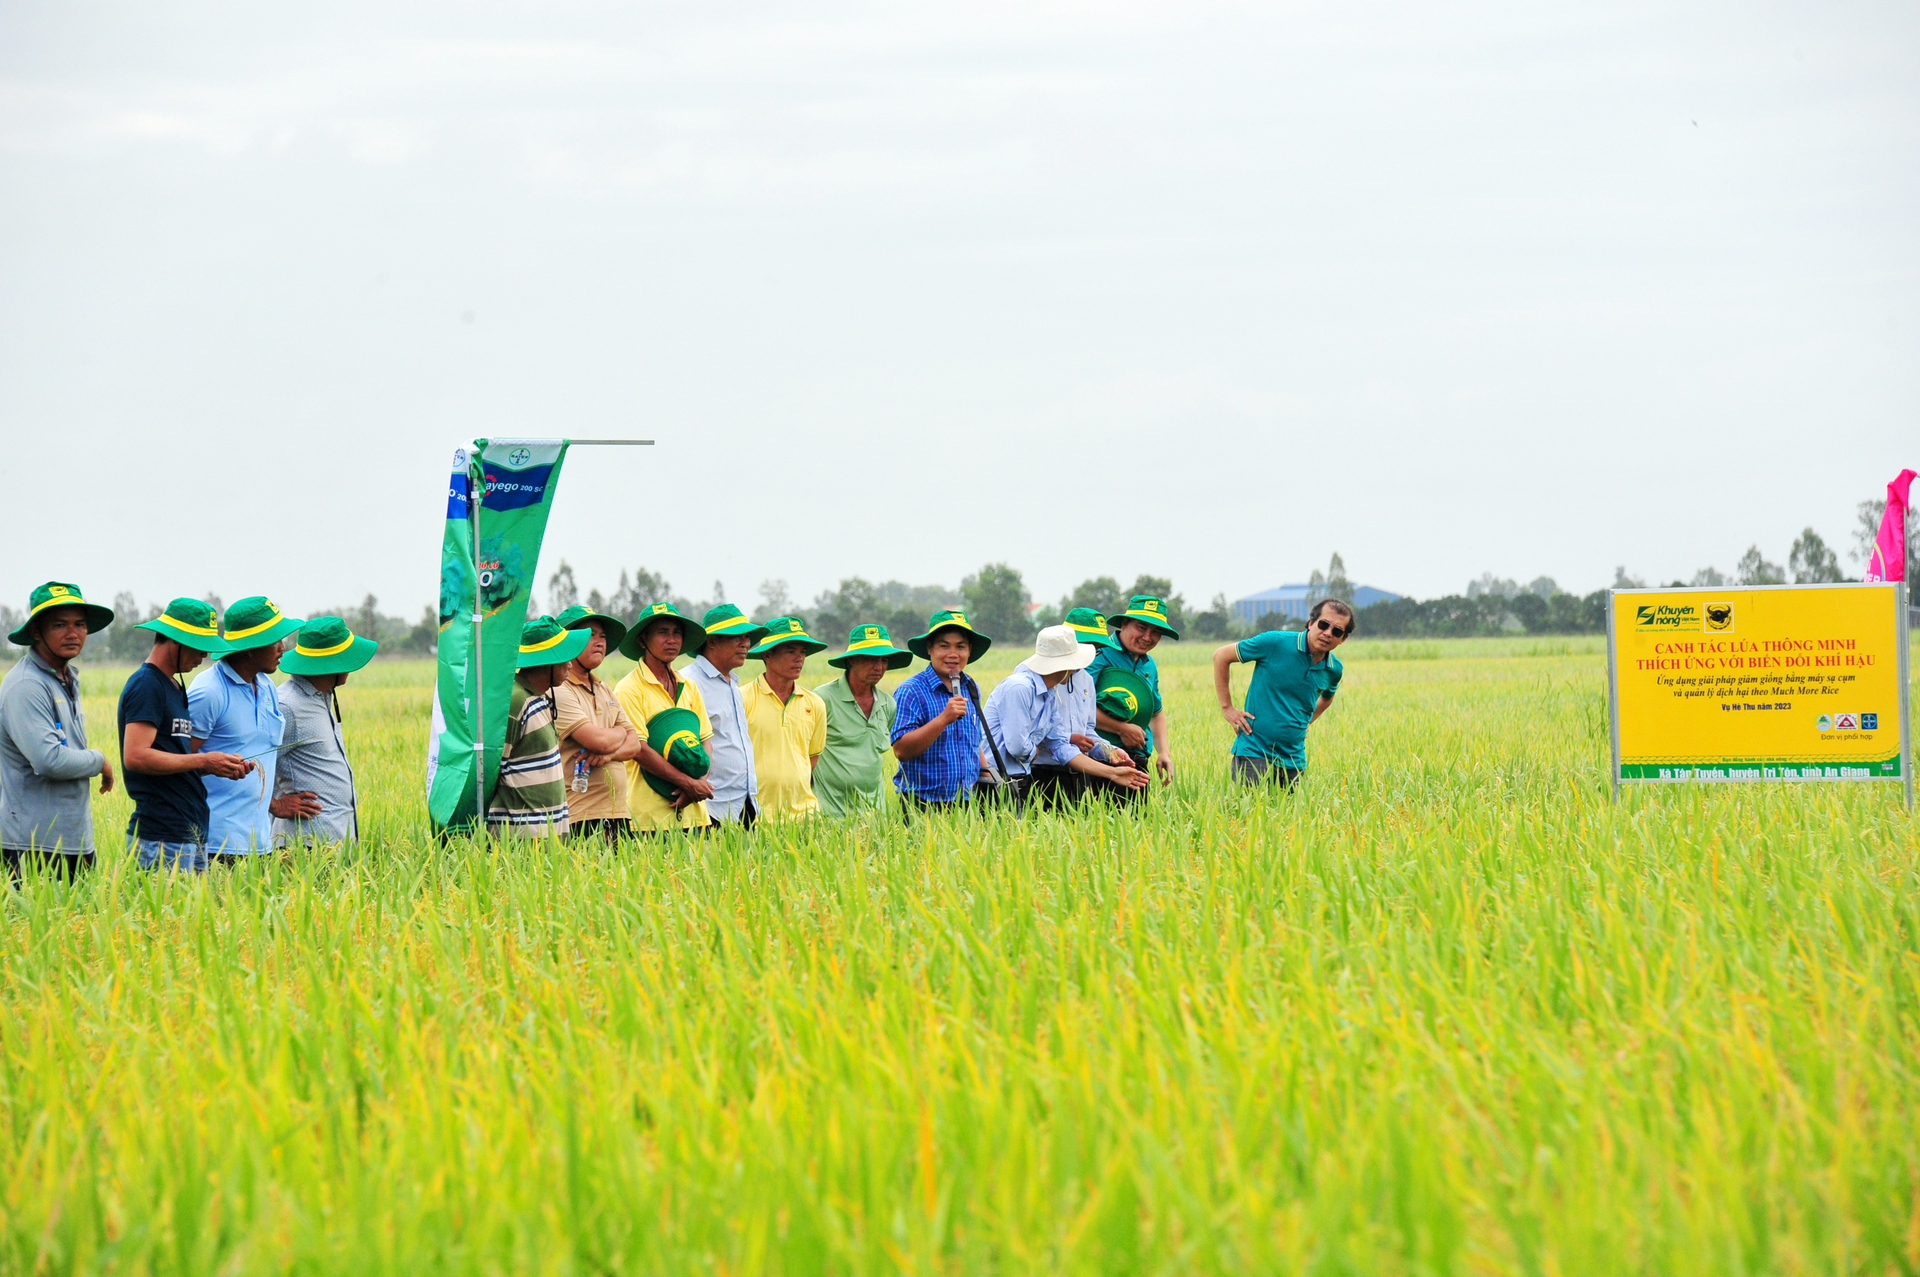 Fields using cluster sowing machines has their rice grown healthily, with hard stems and straight leaves. Photo: Le Hoang Vu.